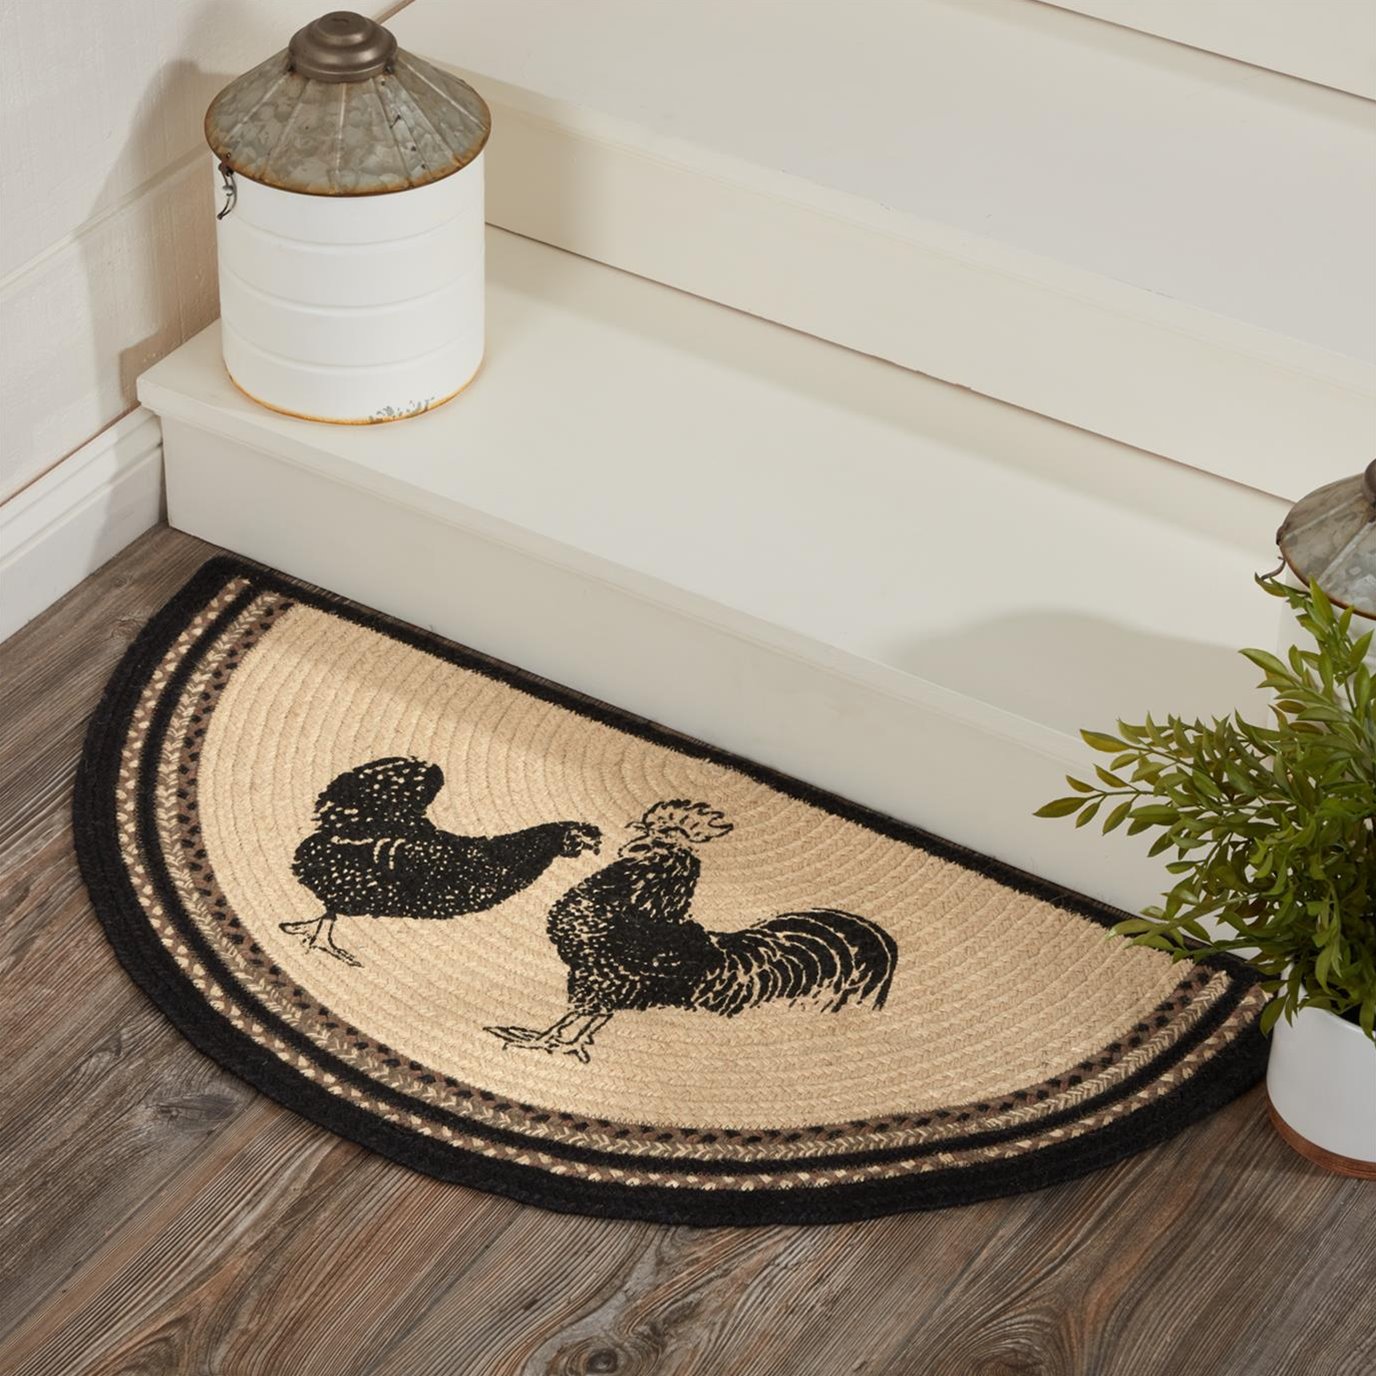 Sawyer Mill Charcoal Poultry Jute Rug Half Circle w/ Pad 16.5x33